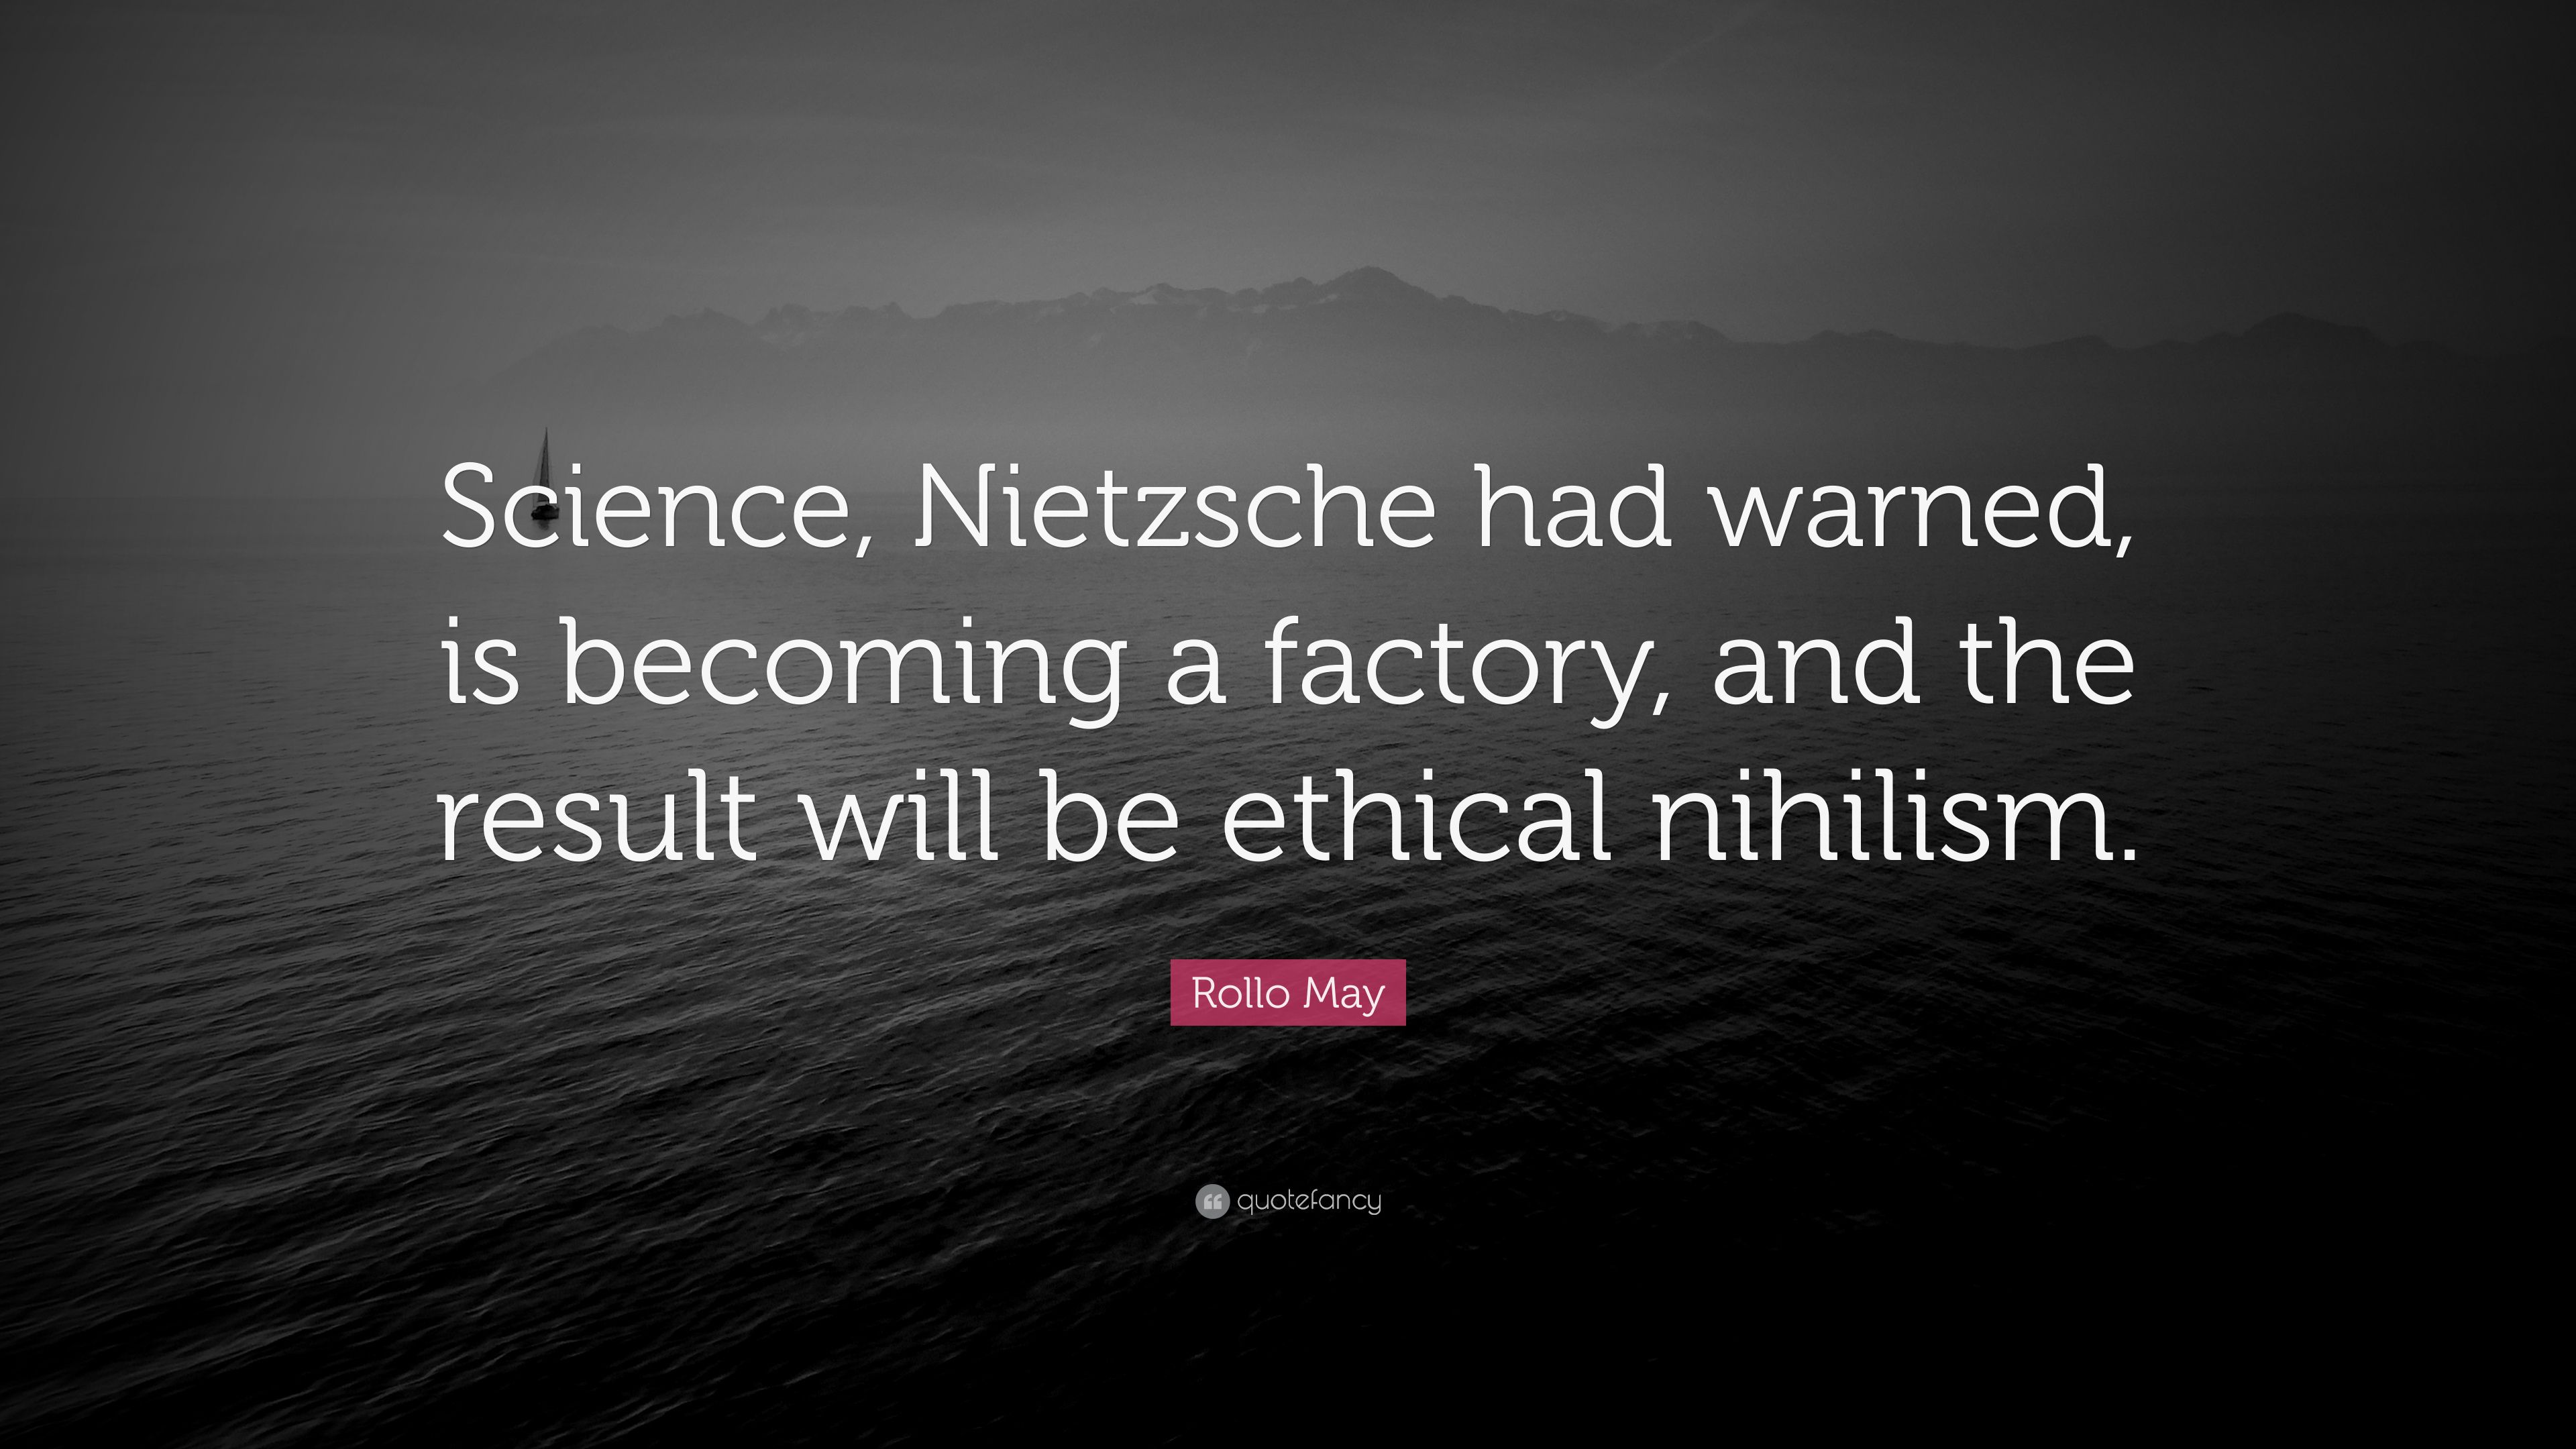 Rollo May Quote: “Science, Nietzsche had warned, is becoming a factory, and the result will be ethical nihilism.” (9 wallpaper)